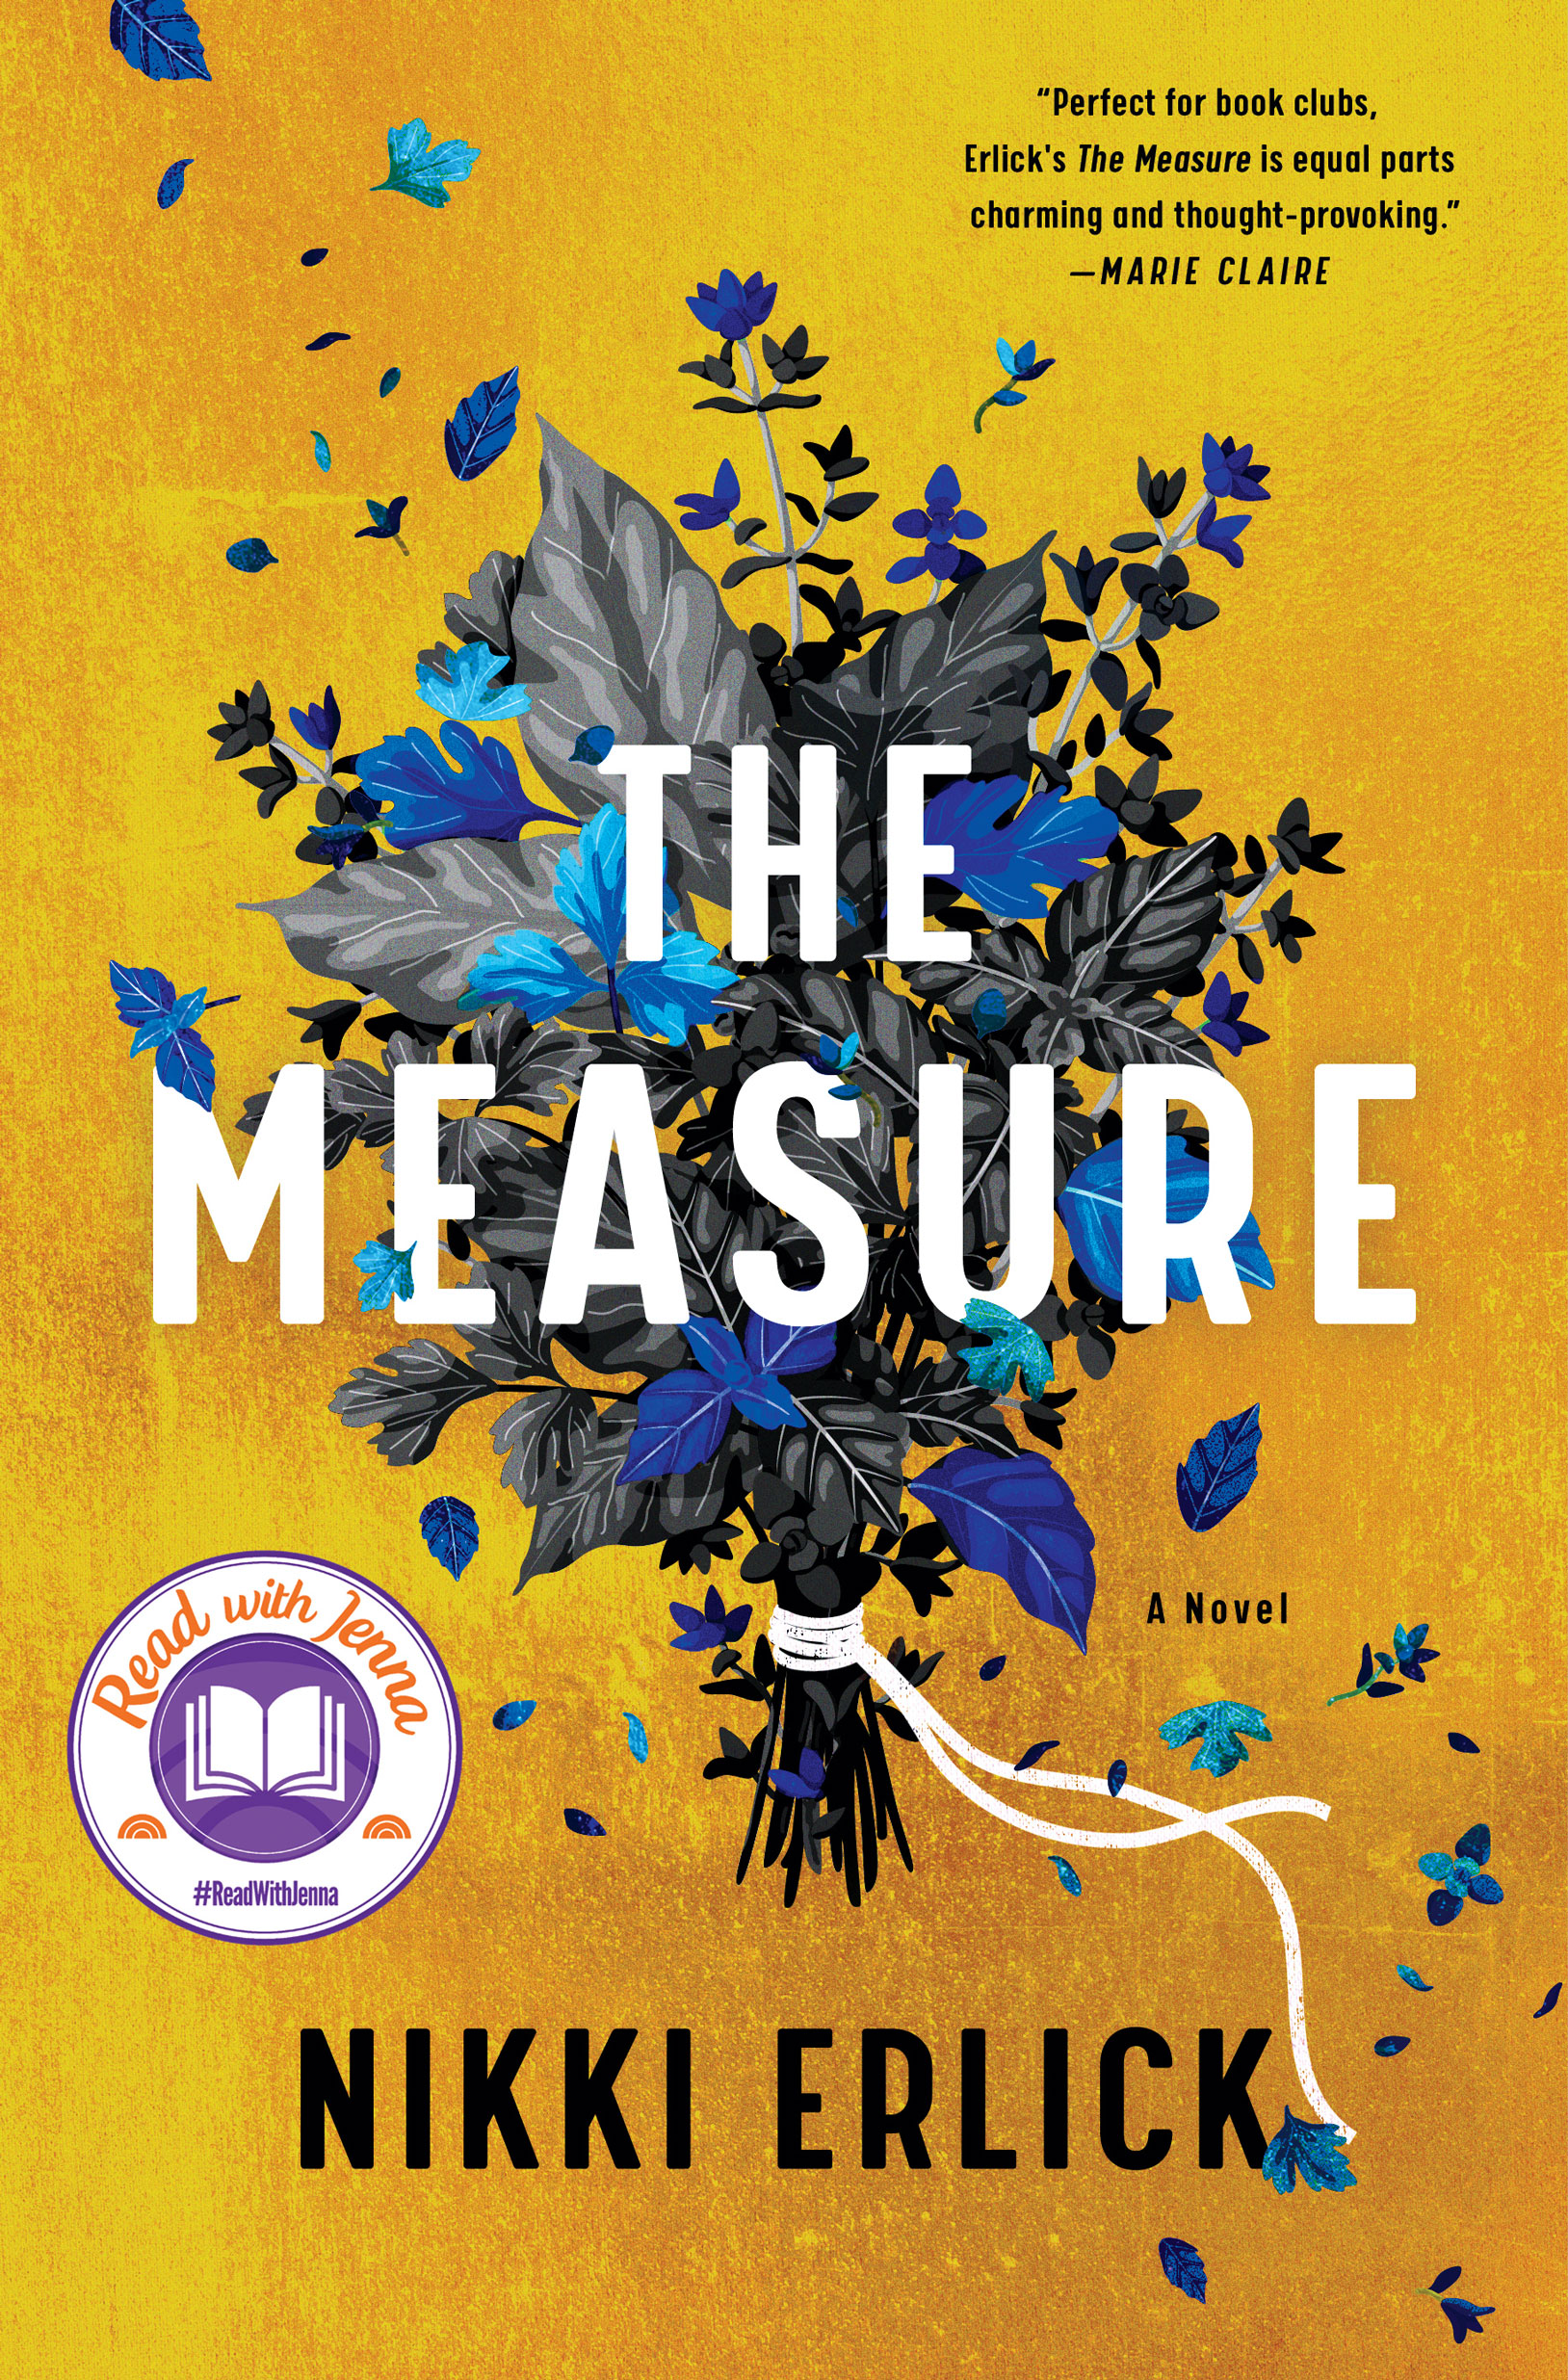 The Measure by Nikki Erlick 2